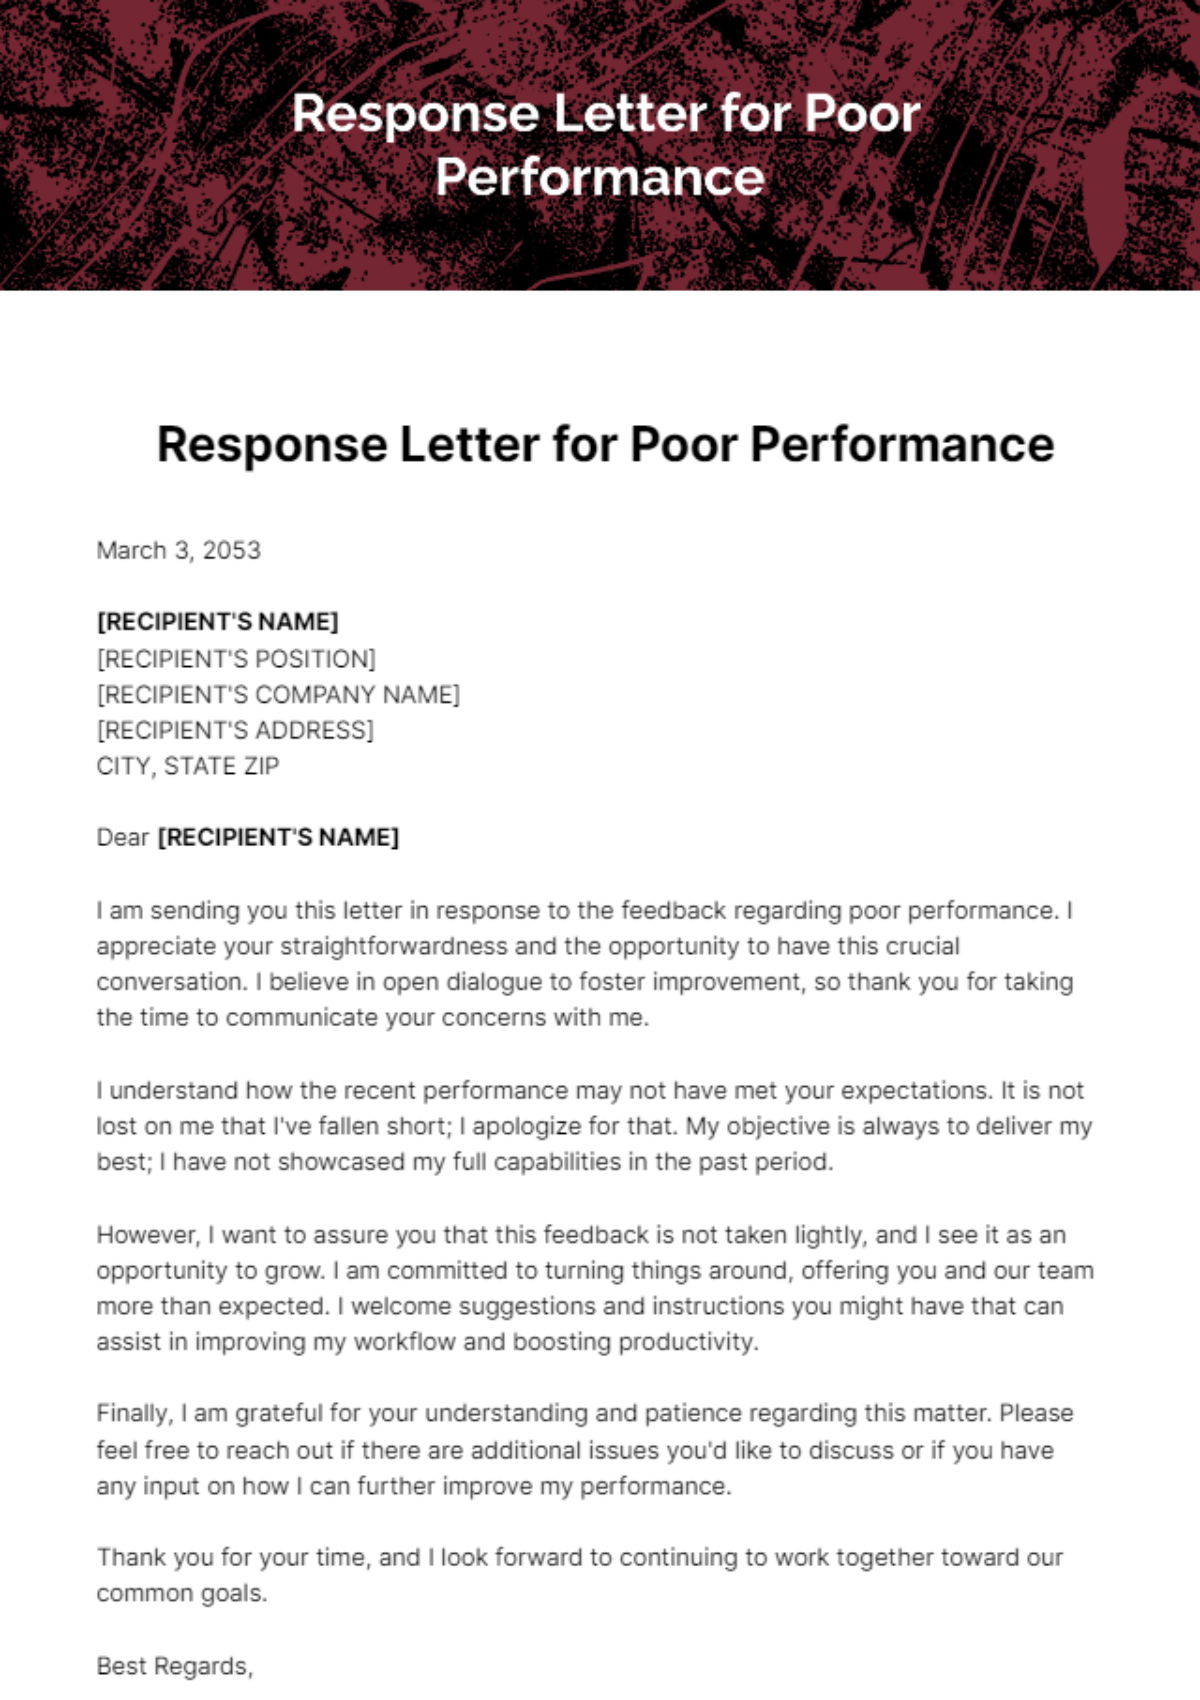 Free Response Letter for Poor Performance Template